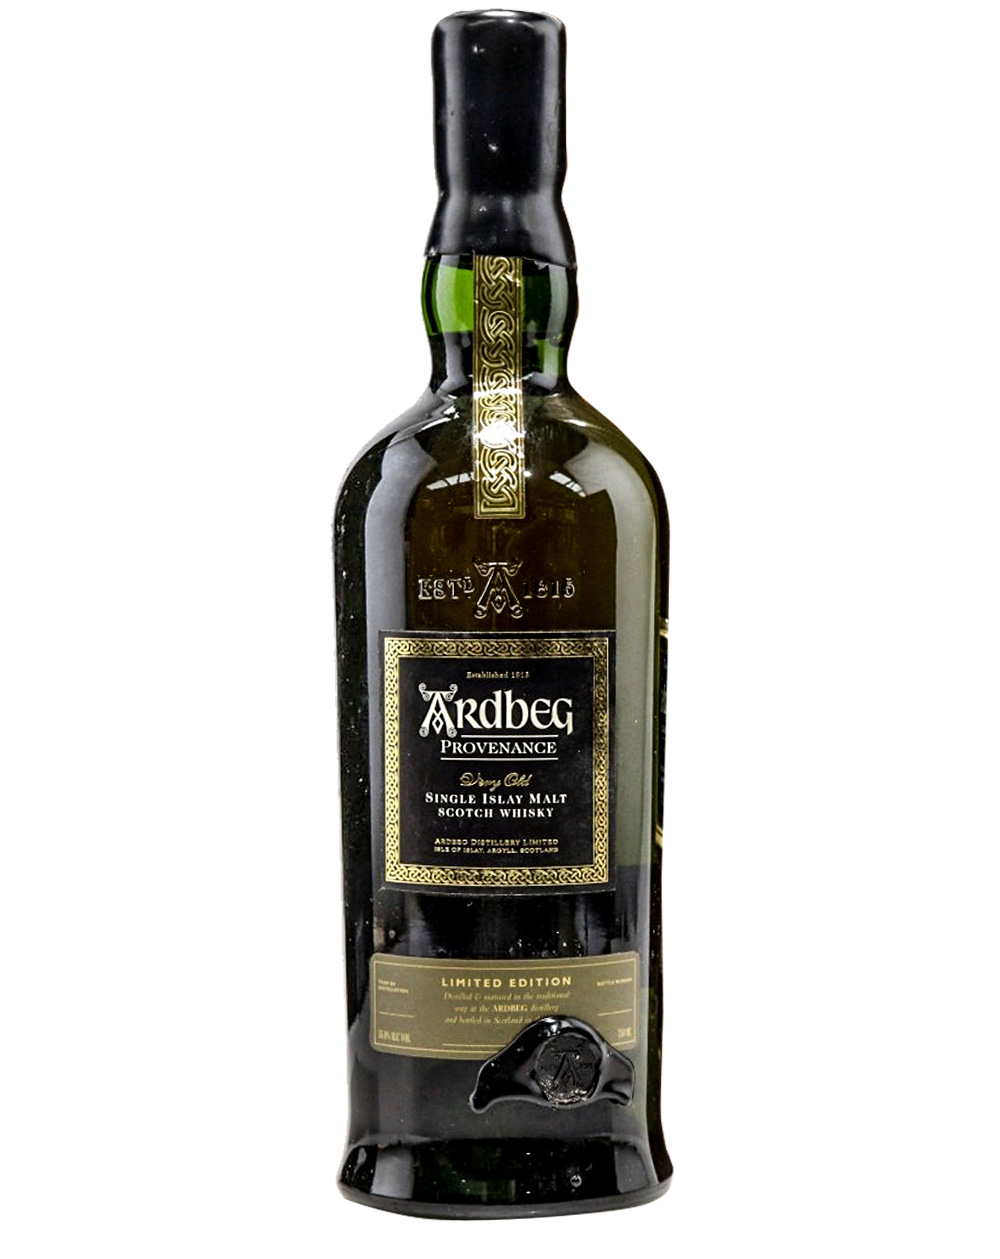 Ardbeg 1974 Provenance - 3rd Release (25 years Old)